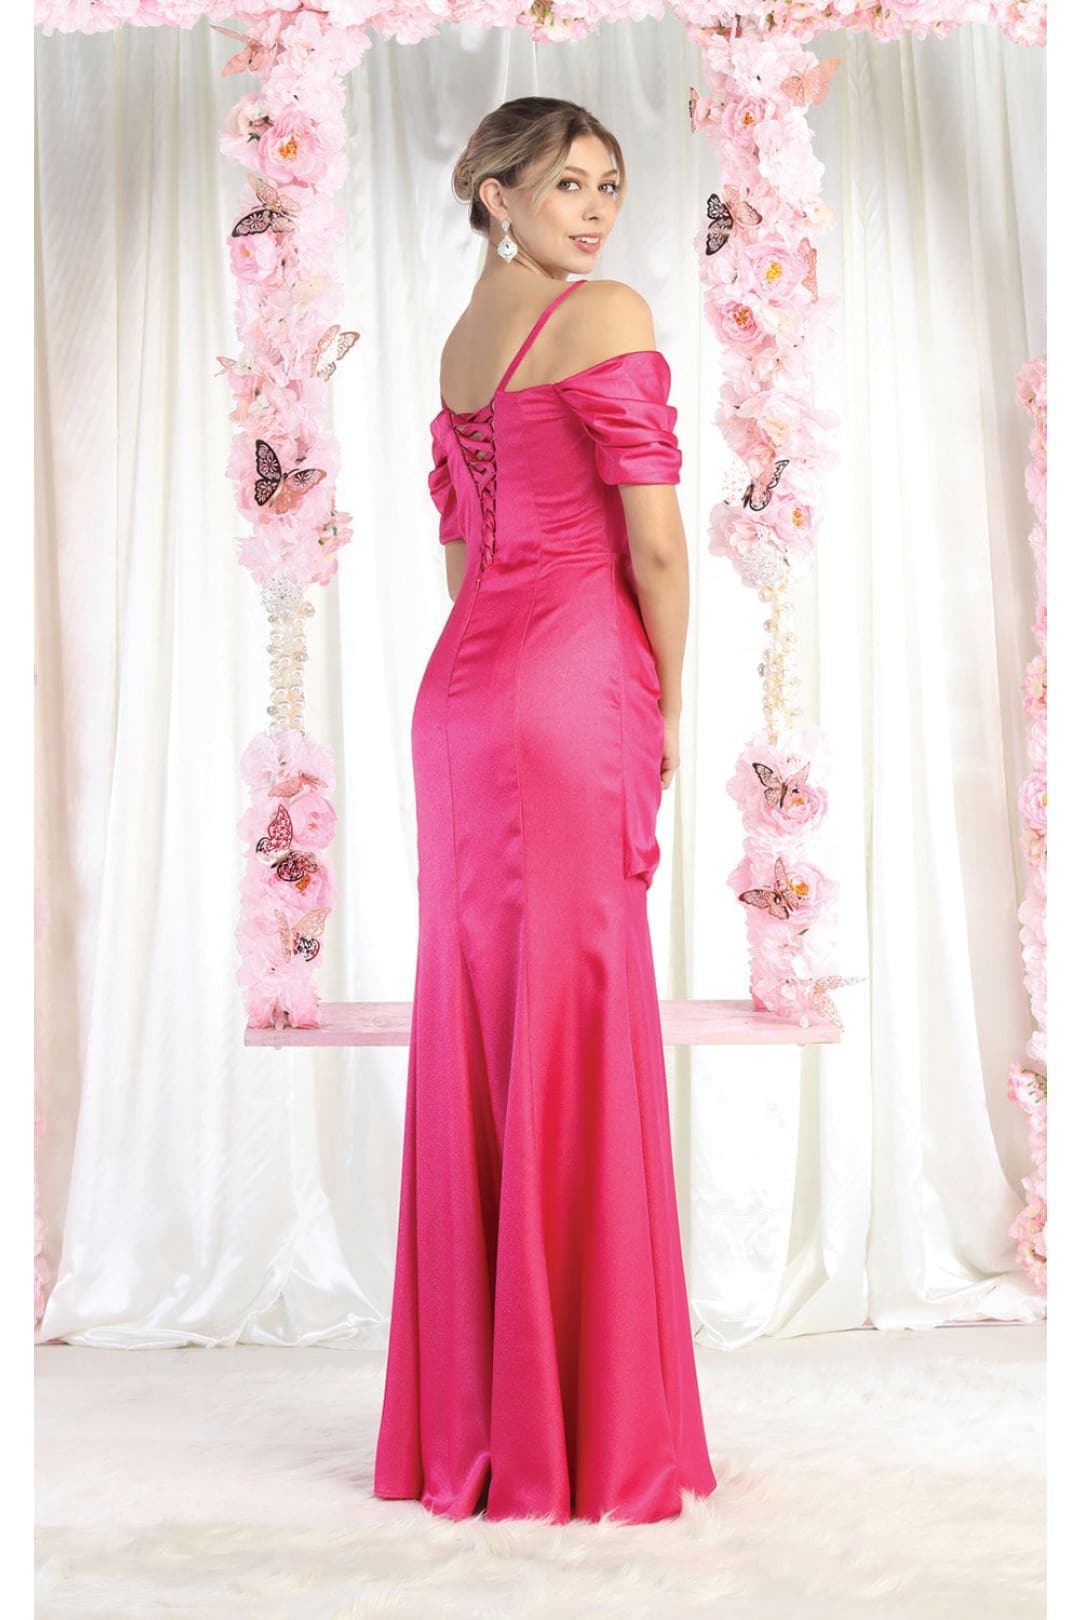 Royal Queen RQ8021 Cold Shoulder Sheath Prom Evening Gown - Dress